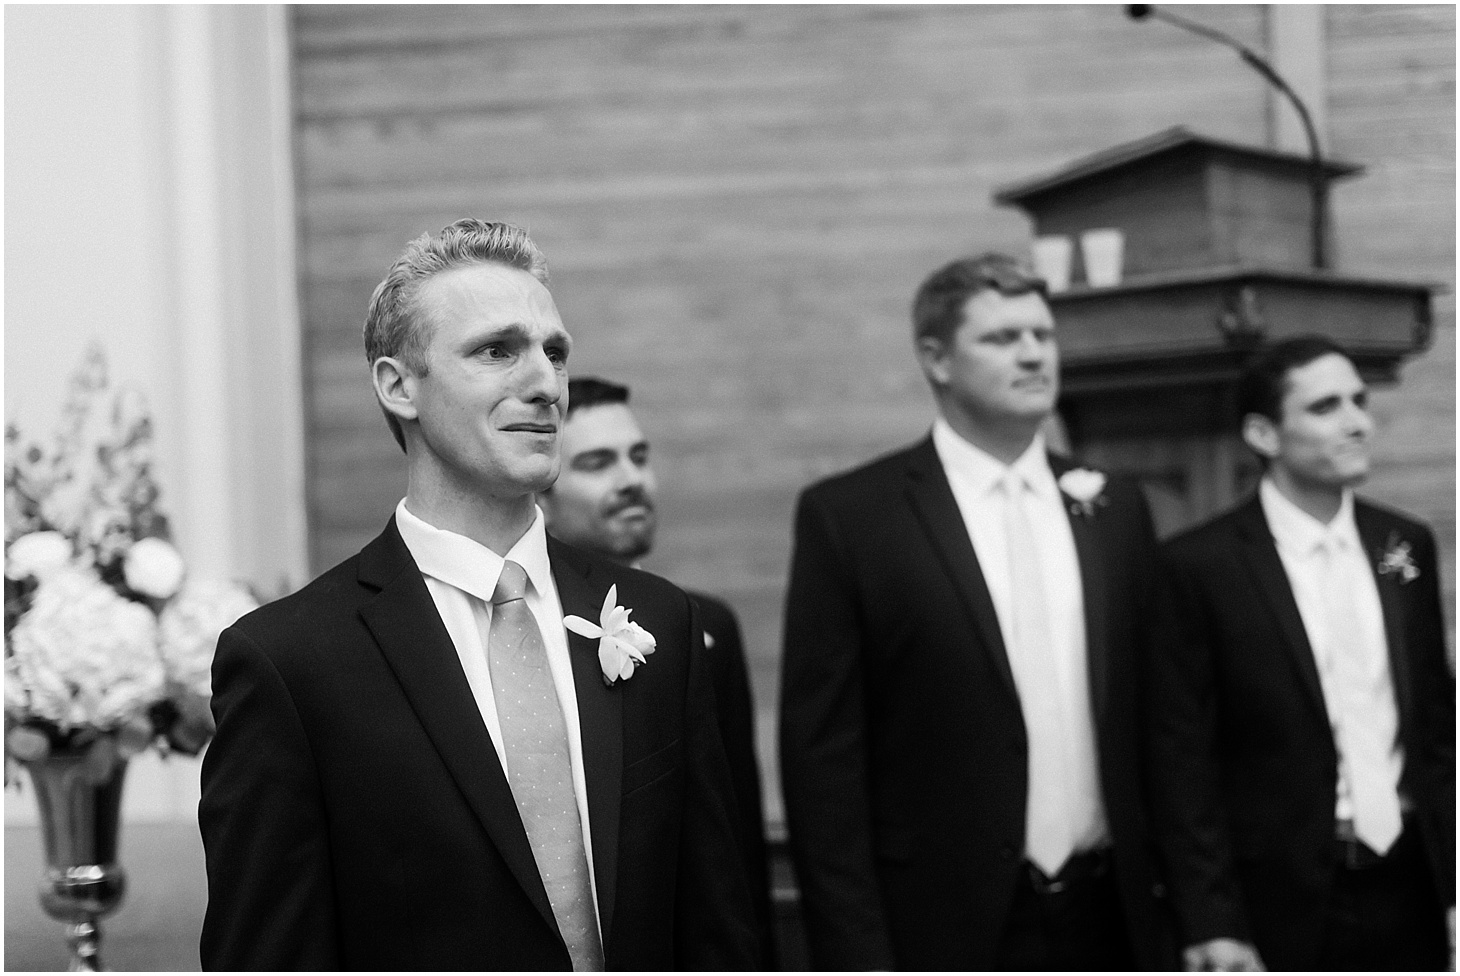 Ceremony at Capitol Hill Baptist Church, Navy and Blush Summer Wedding at the Army and Navy Club, Sarah Bradshaw Photography, DC Wedding Photographer